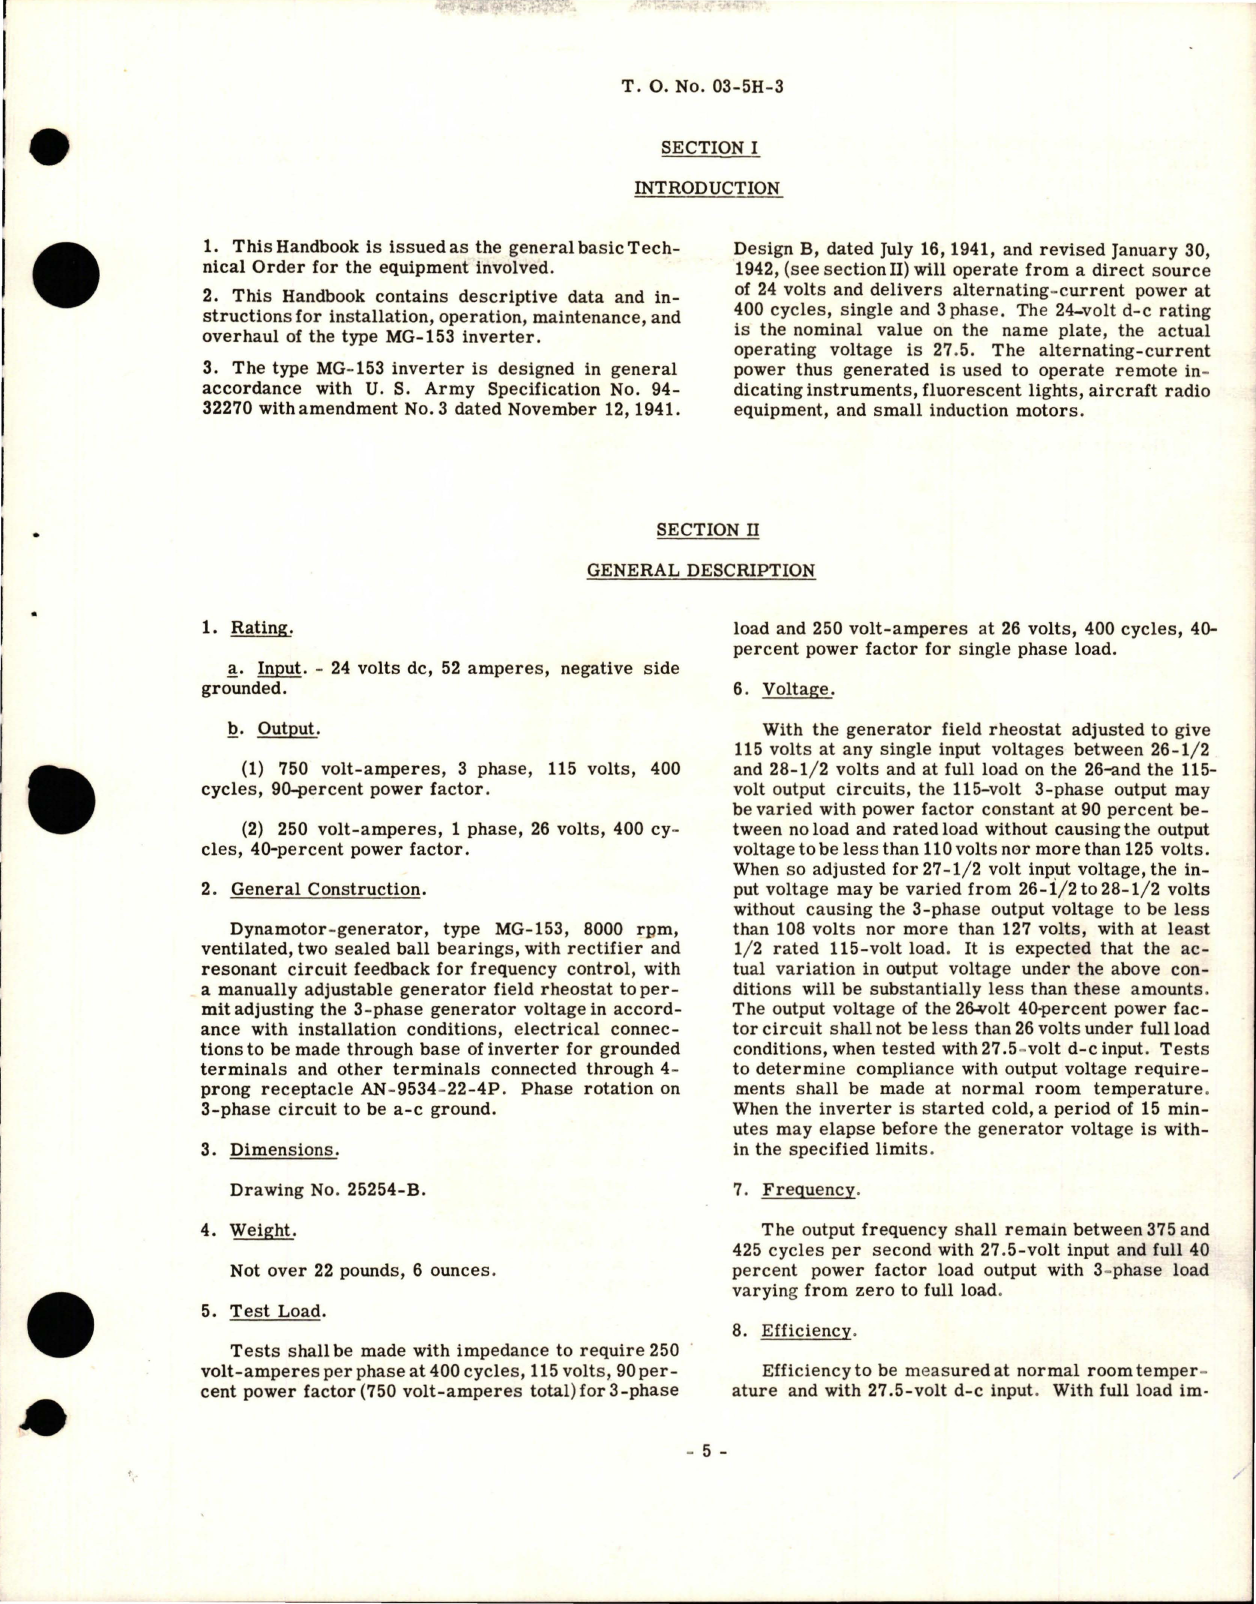 Sample page 7 from AirCorps Library document: Instructions with Parts Catalog for Inverter - Type MG-153 